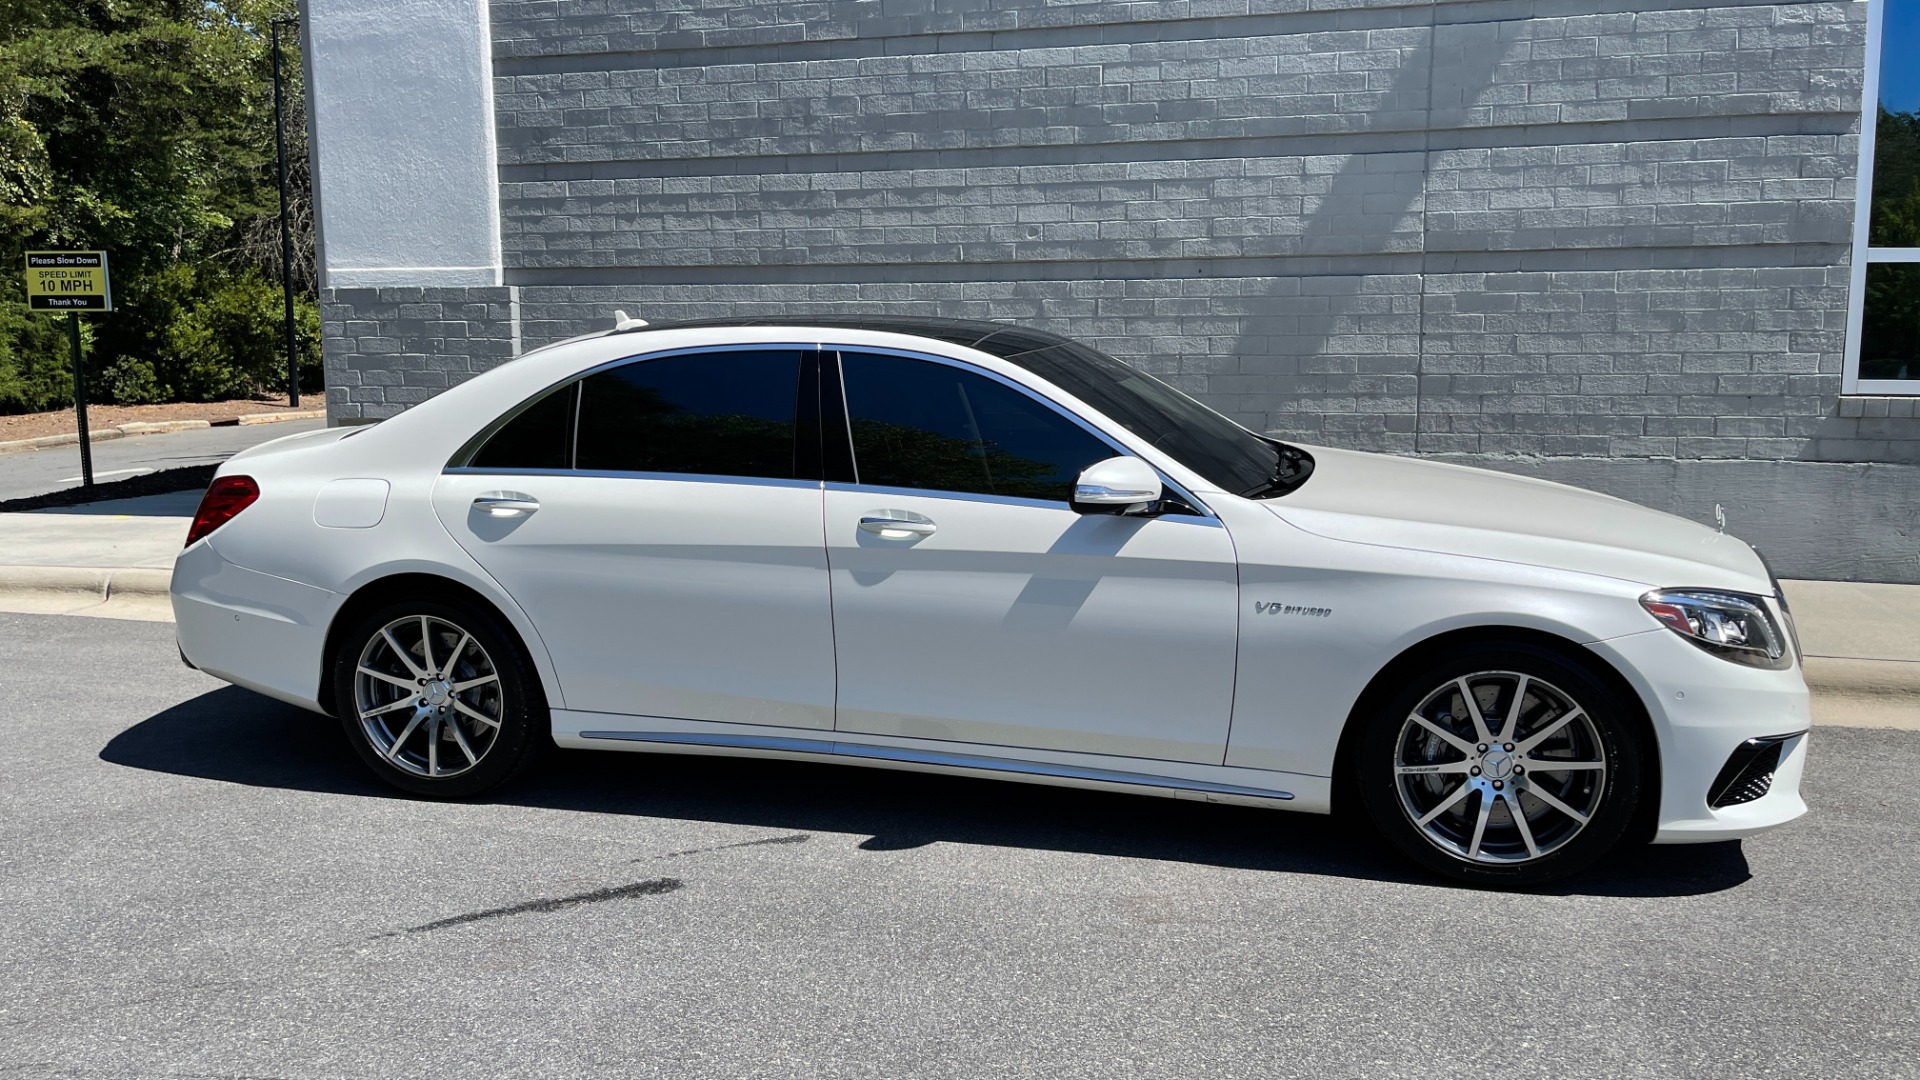 Used 2016 Mercedes-Benz S-Class AMG S63 / EXCLUSIVE TRIM / BURMESTER 3D HIGH END SOUND / DRIVER ASSISTANCE  for sale $68,995 at Formula Imports in Charlotte NC 28227 3